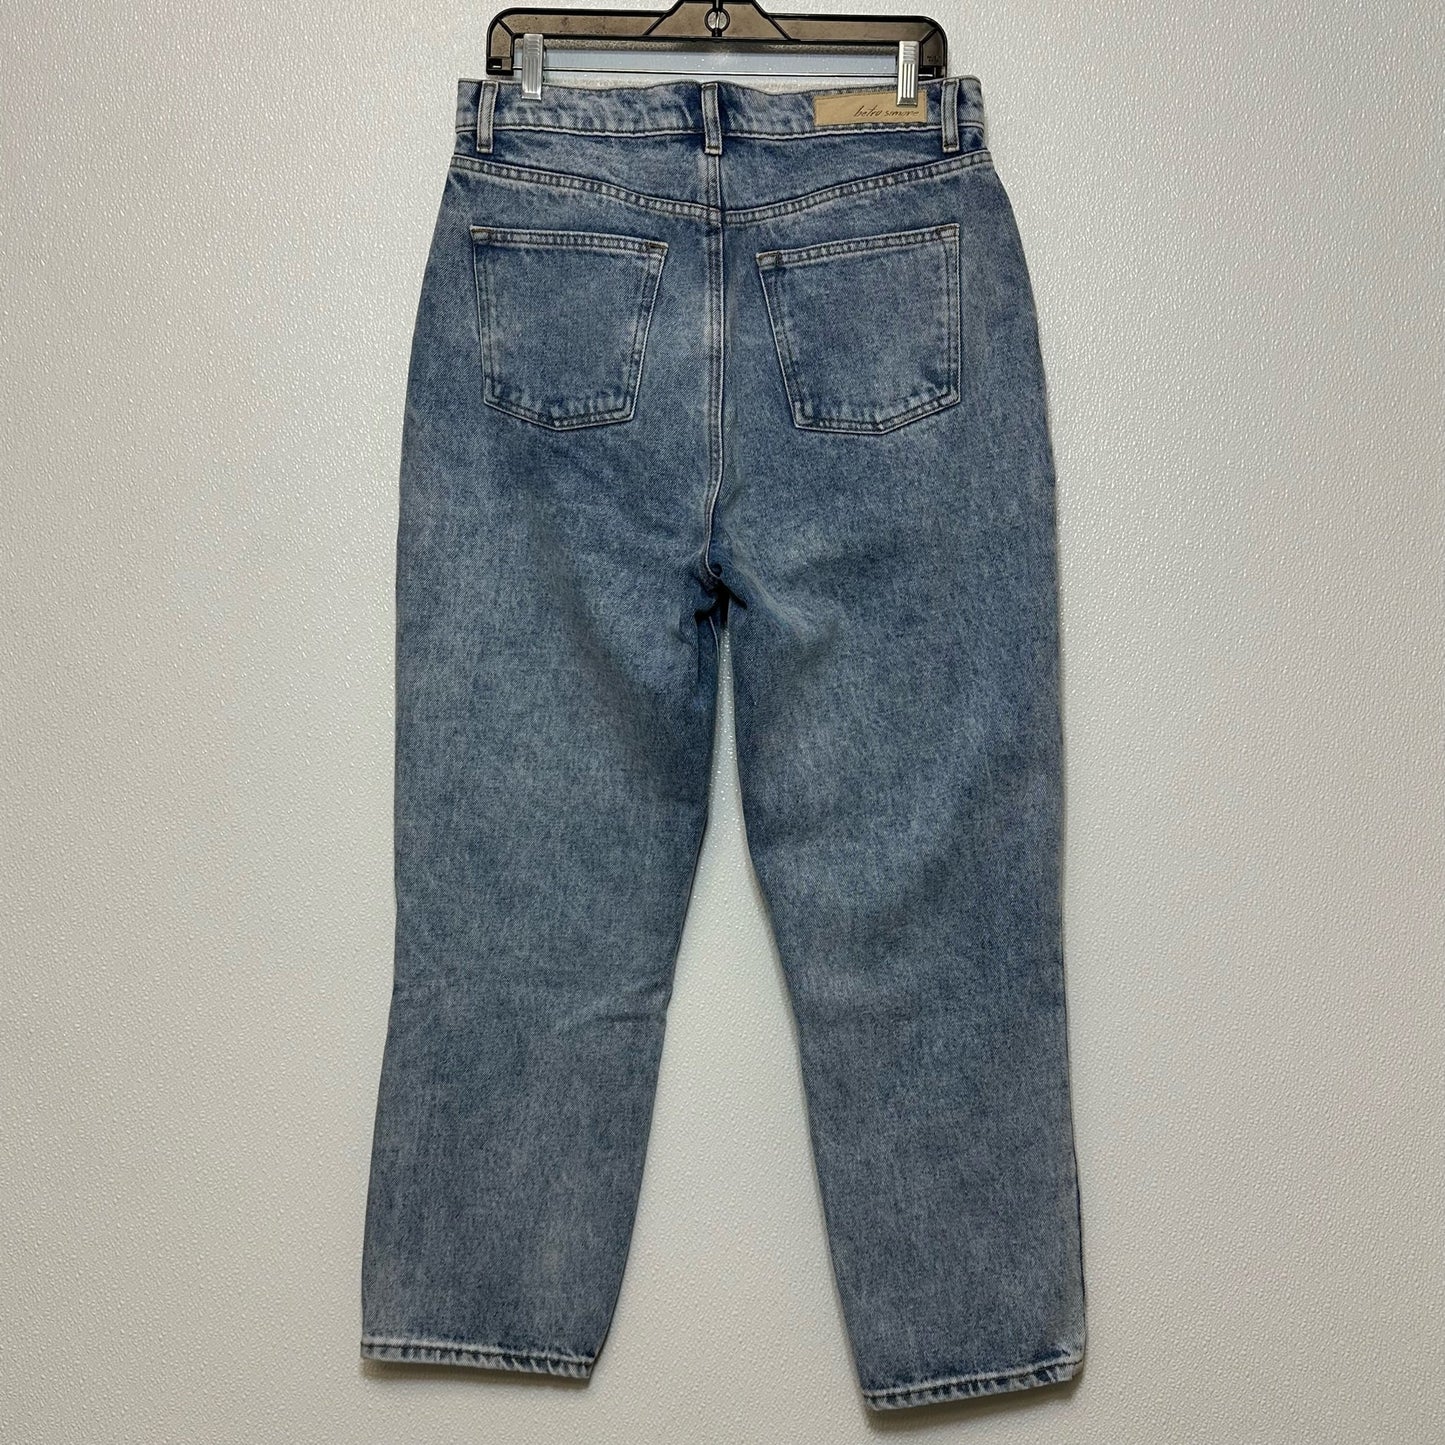 Jeans Relaxed/boyfriend By Cme  Size: 12